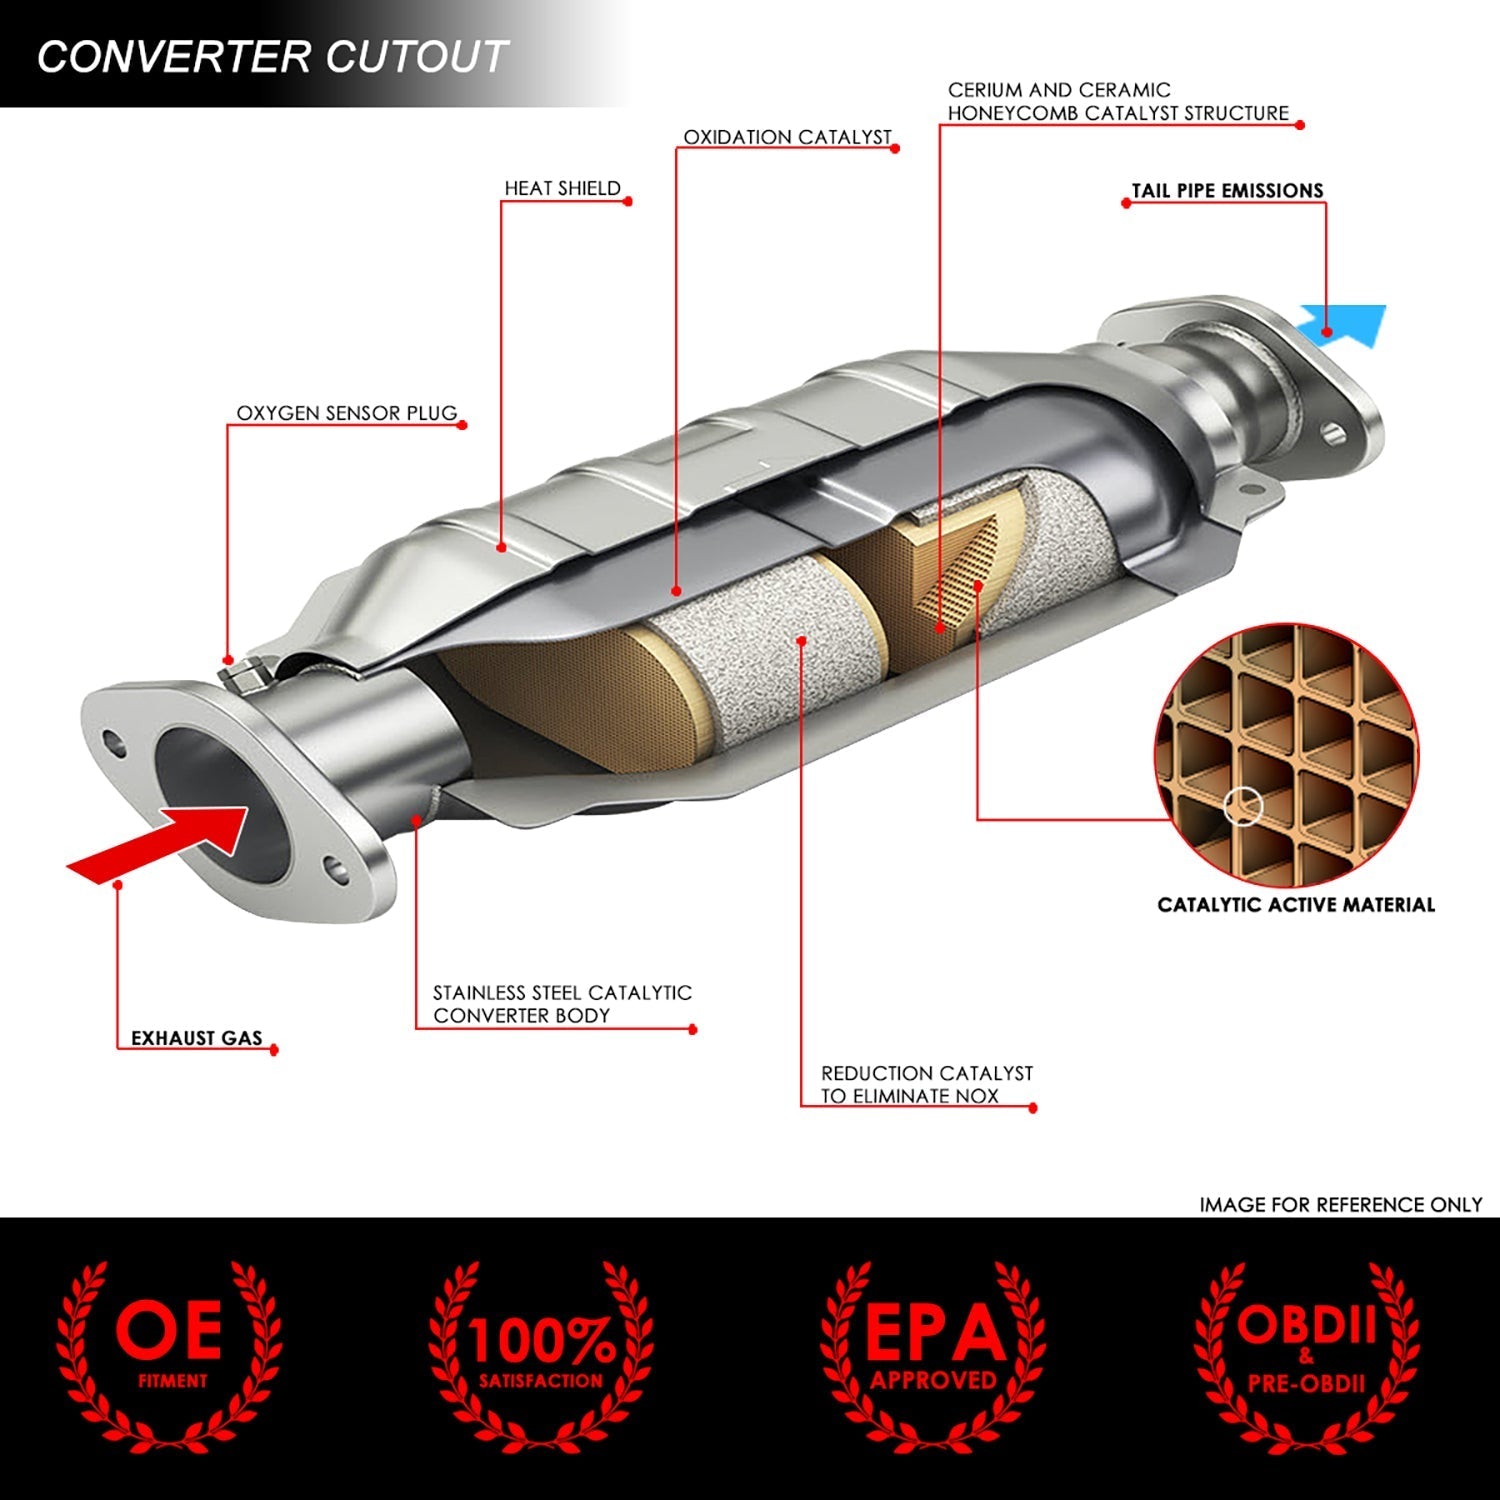 Factory Replacement Catalytic Converter <BR>07-19 Toyota Tundra 4.6L 5.7L